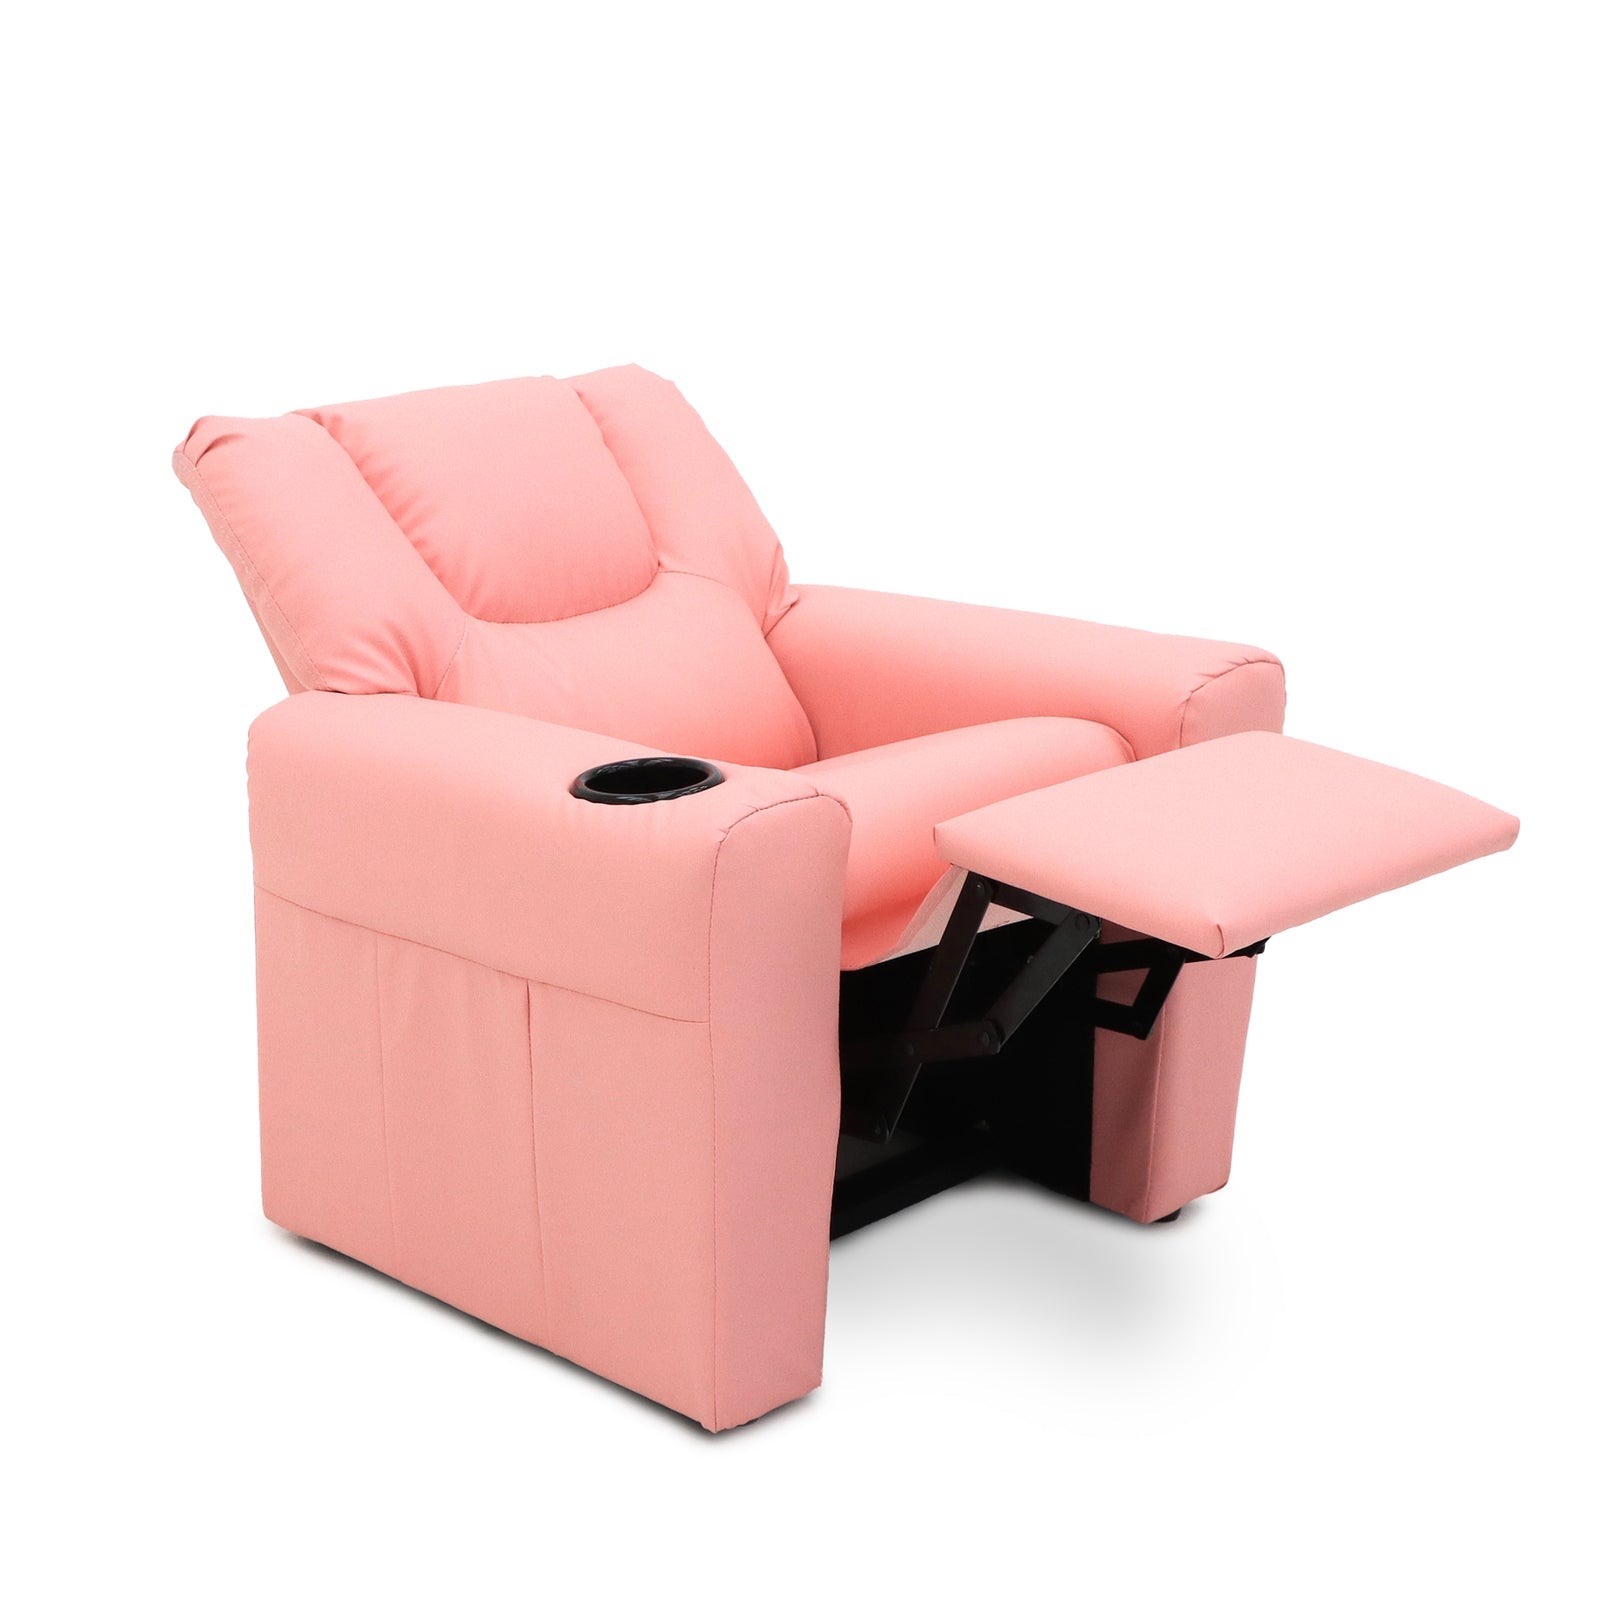 Hacienda Kids Pink Recliner Chair with Built-In Cup Holder & Footrest